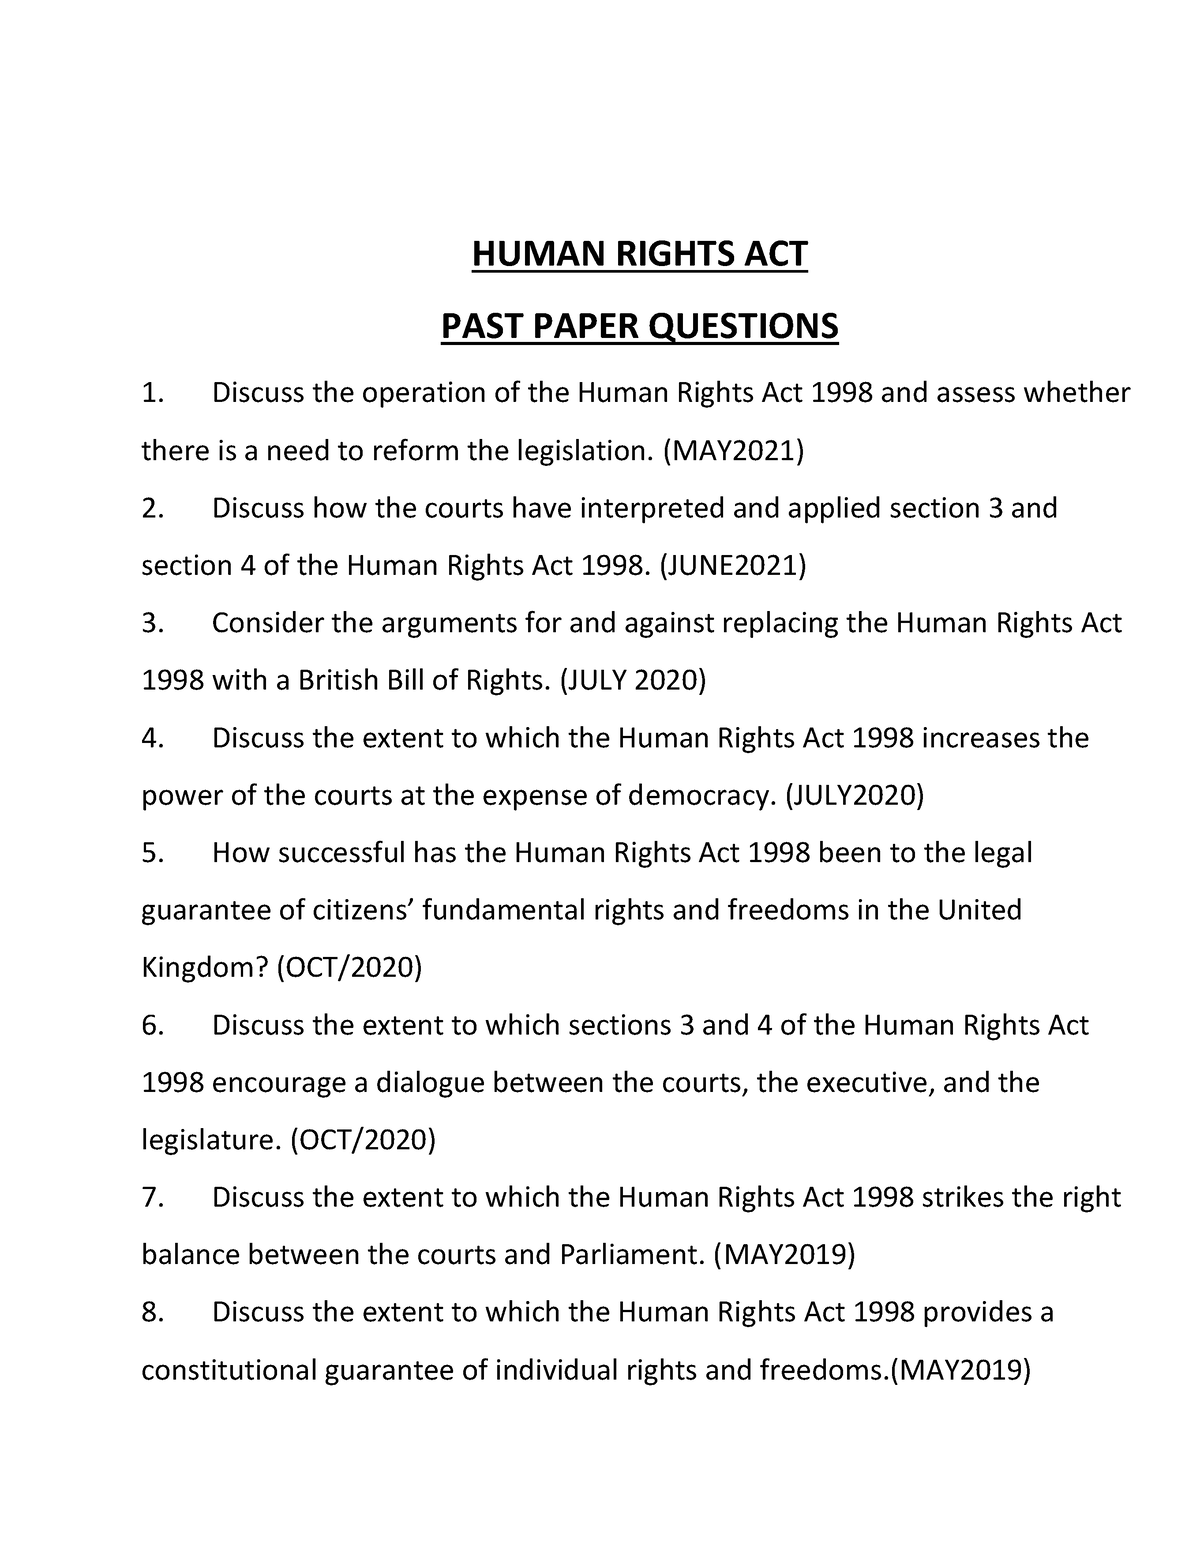 research questions human rights